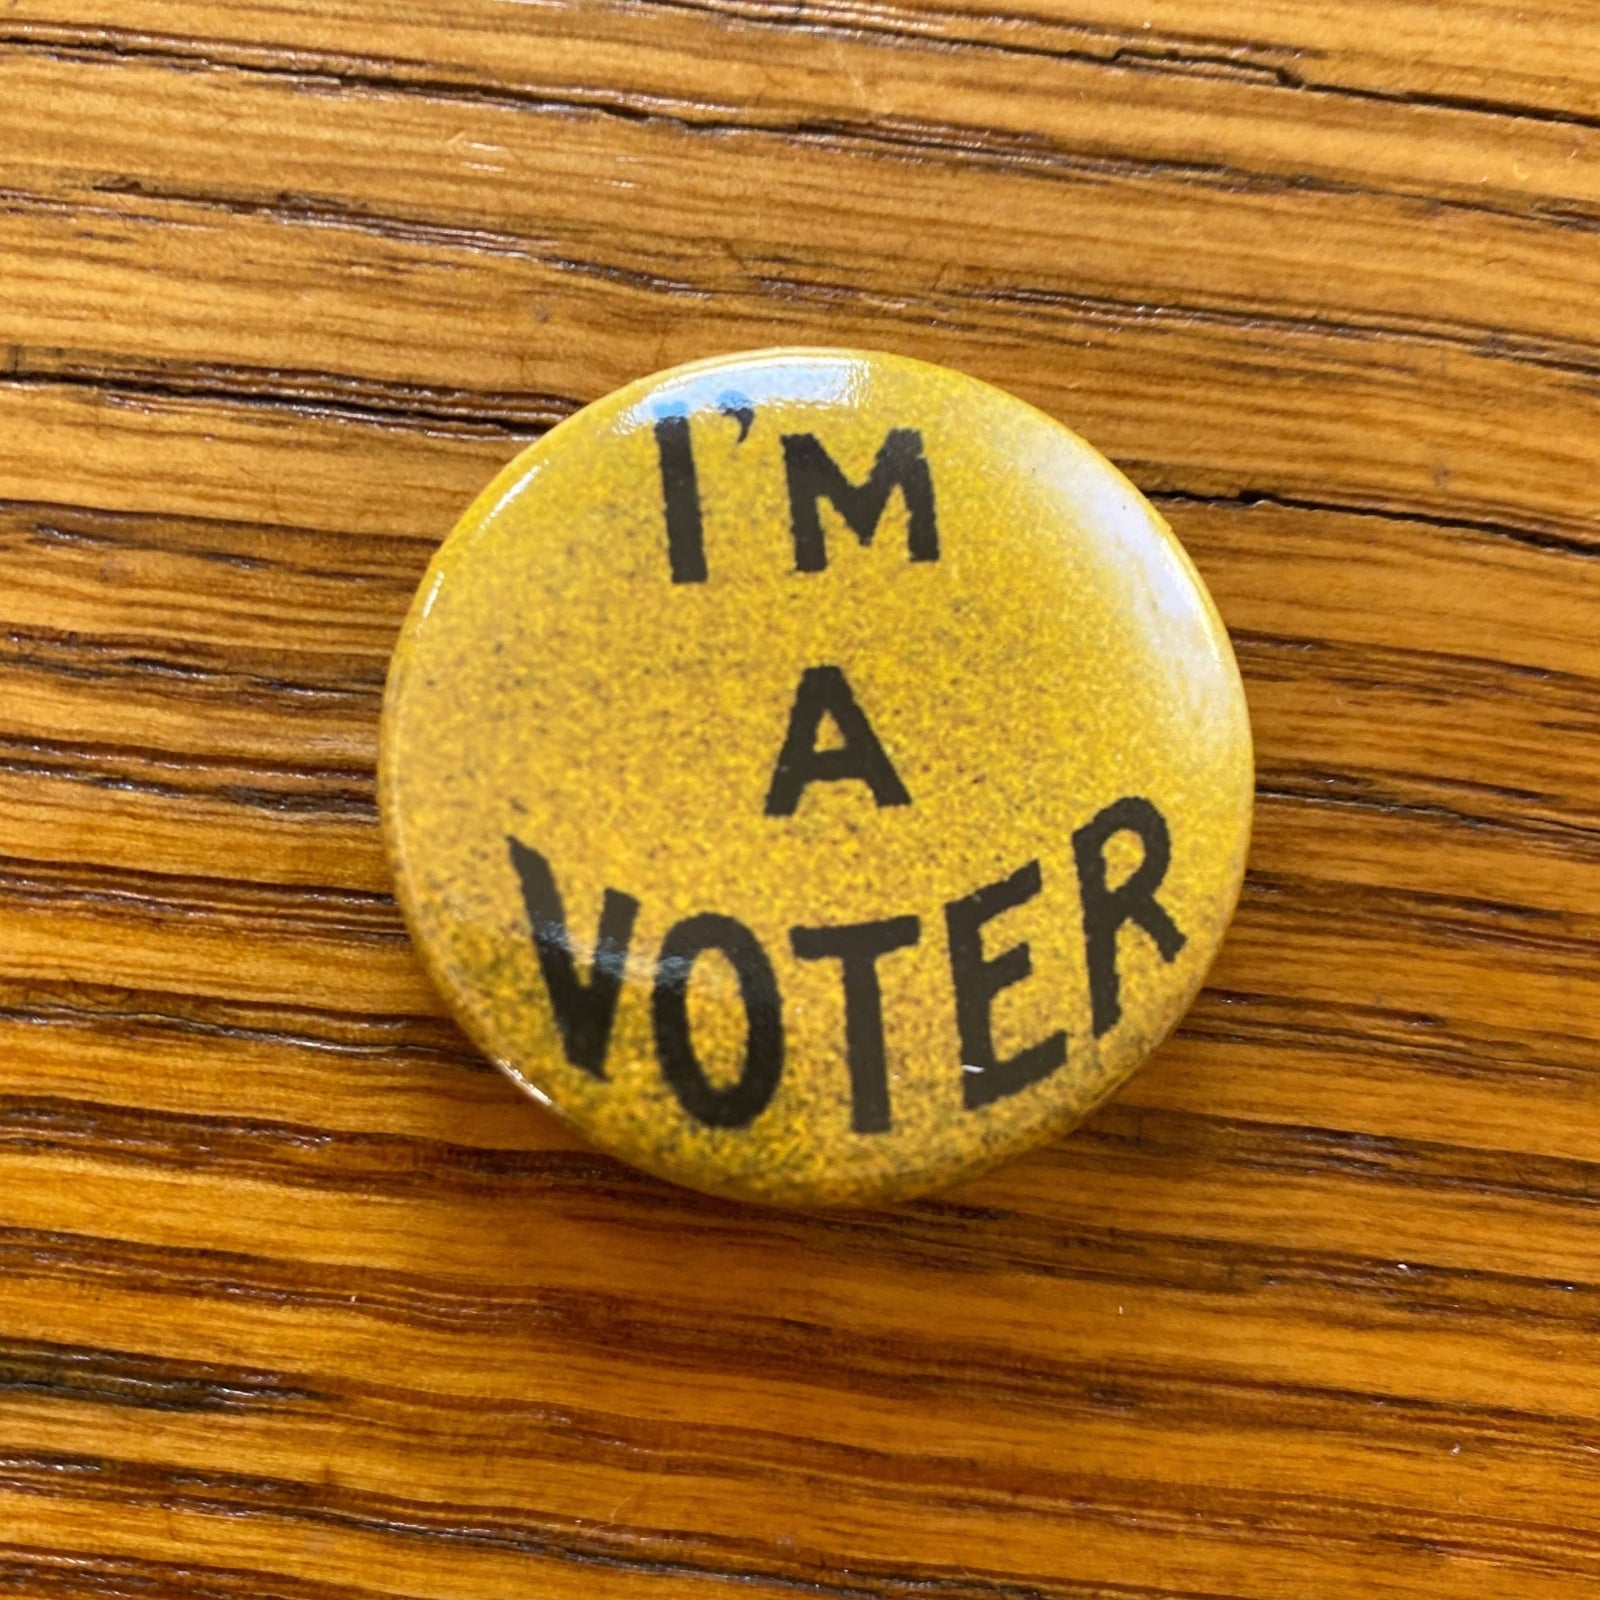 "I'm a Voter" Button pin from The History List store